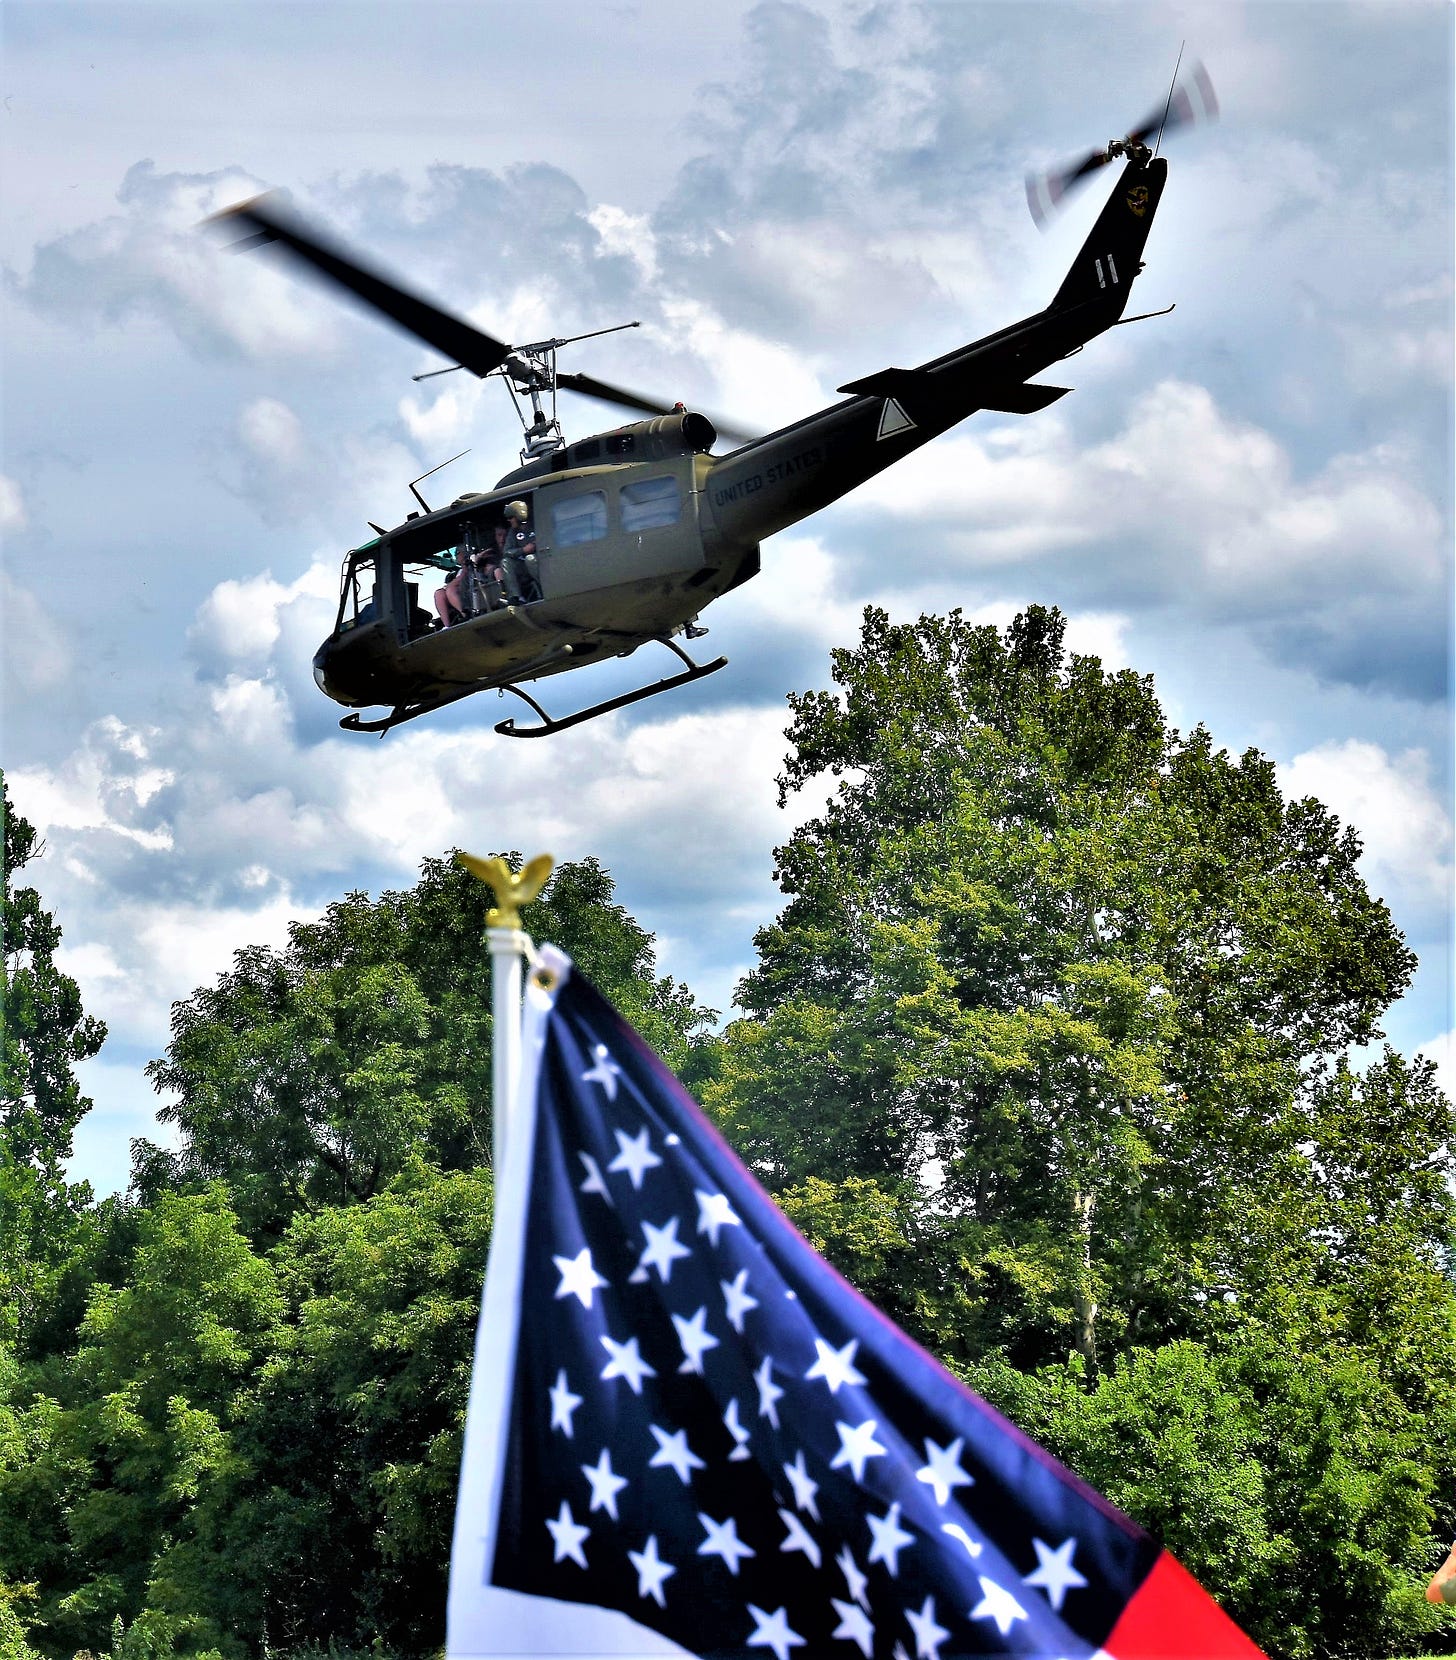 A Huey helicopter flies over an American flag.